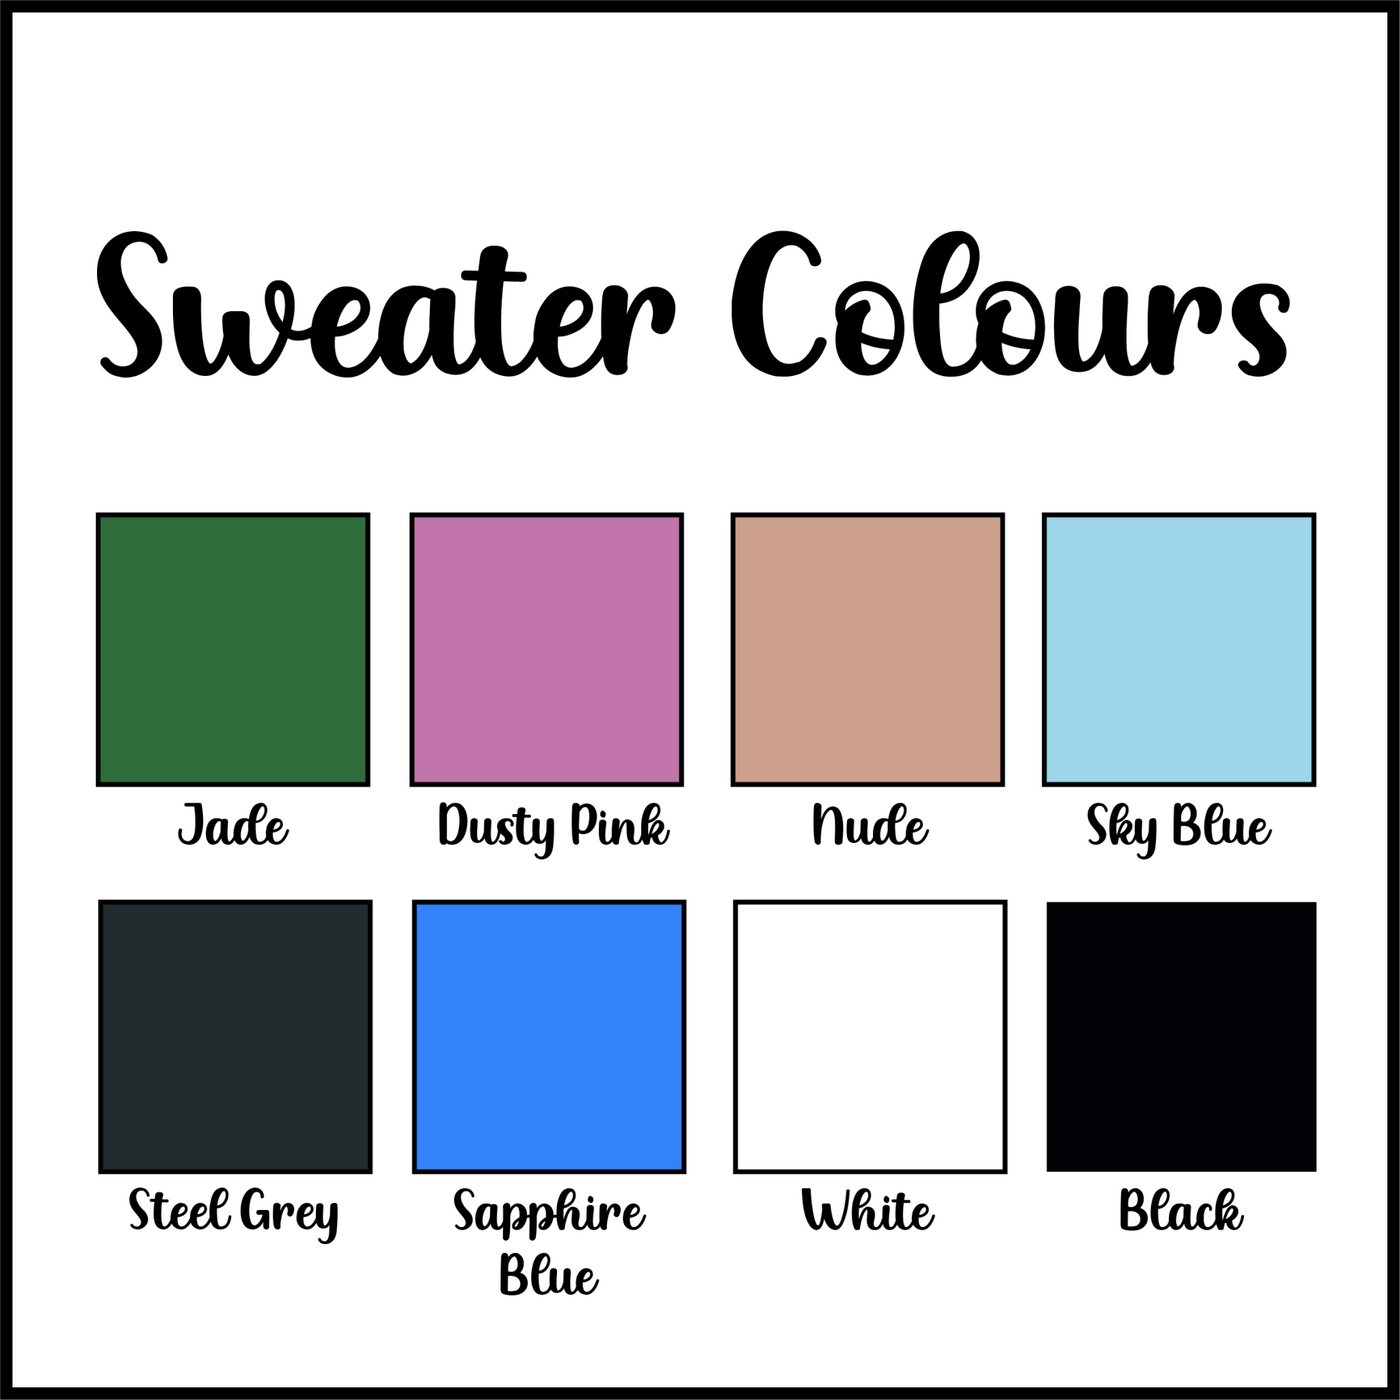 Content Creator Sweater - Amber and Noah